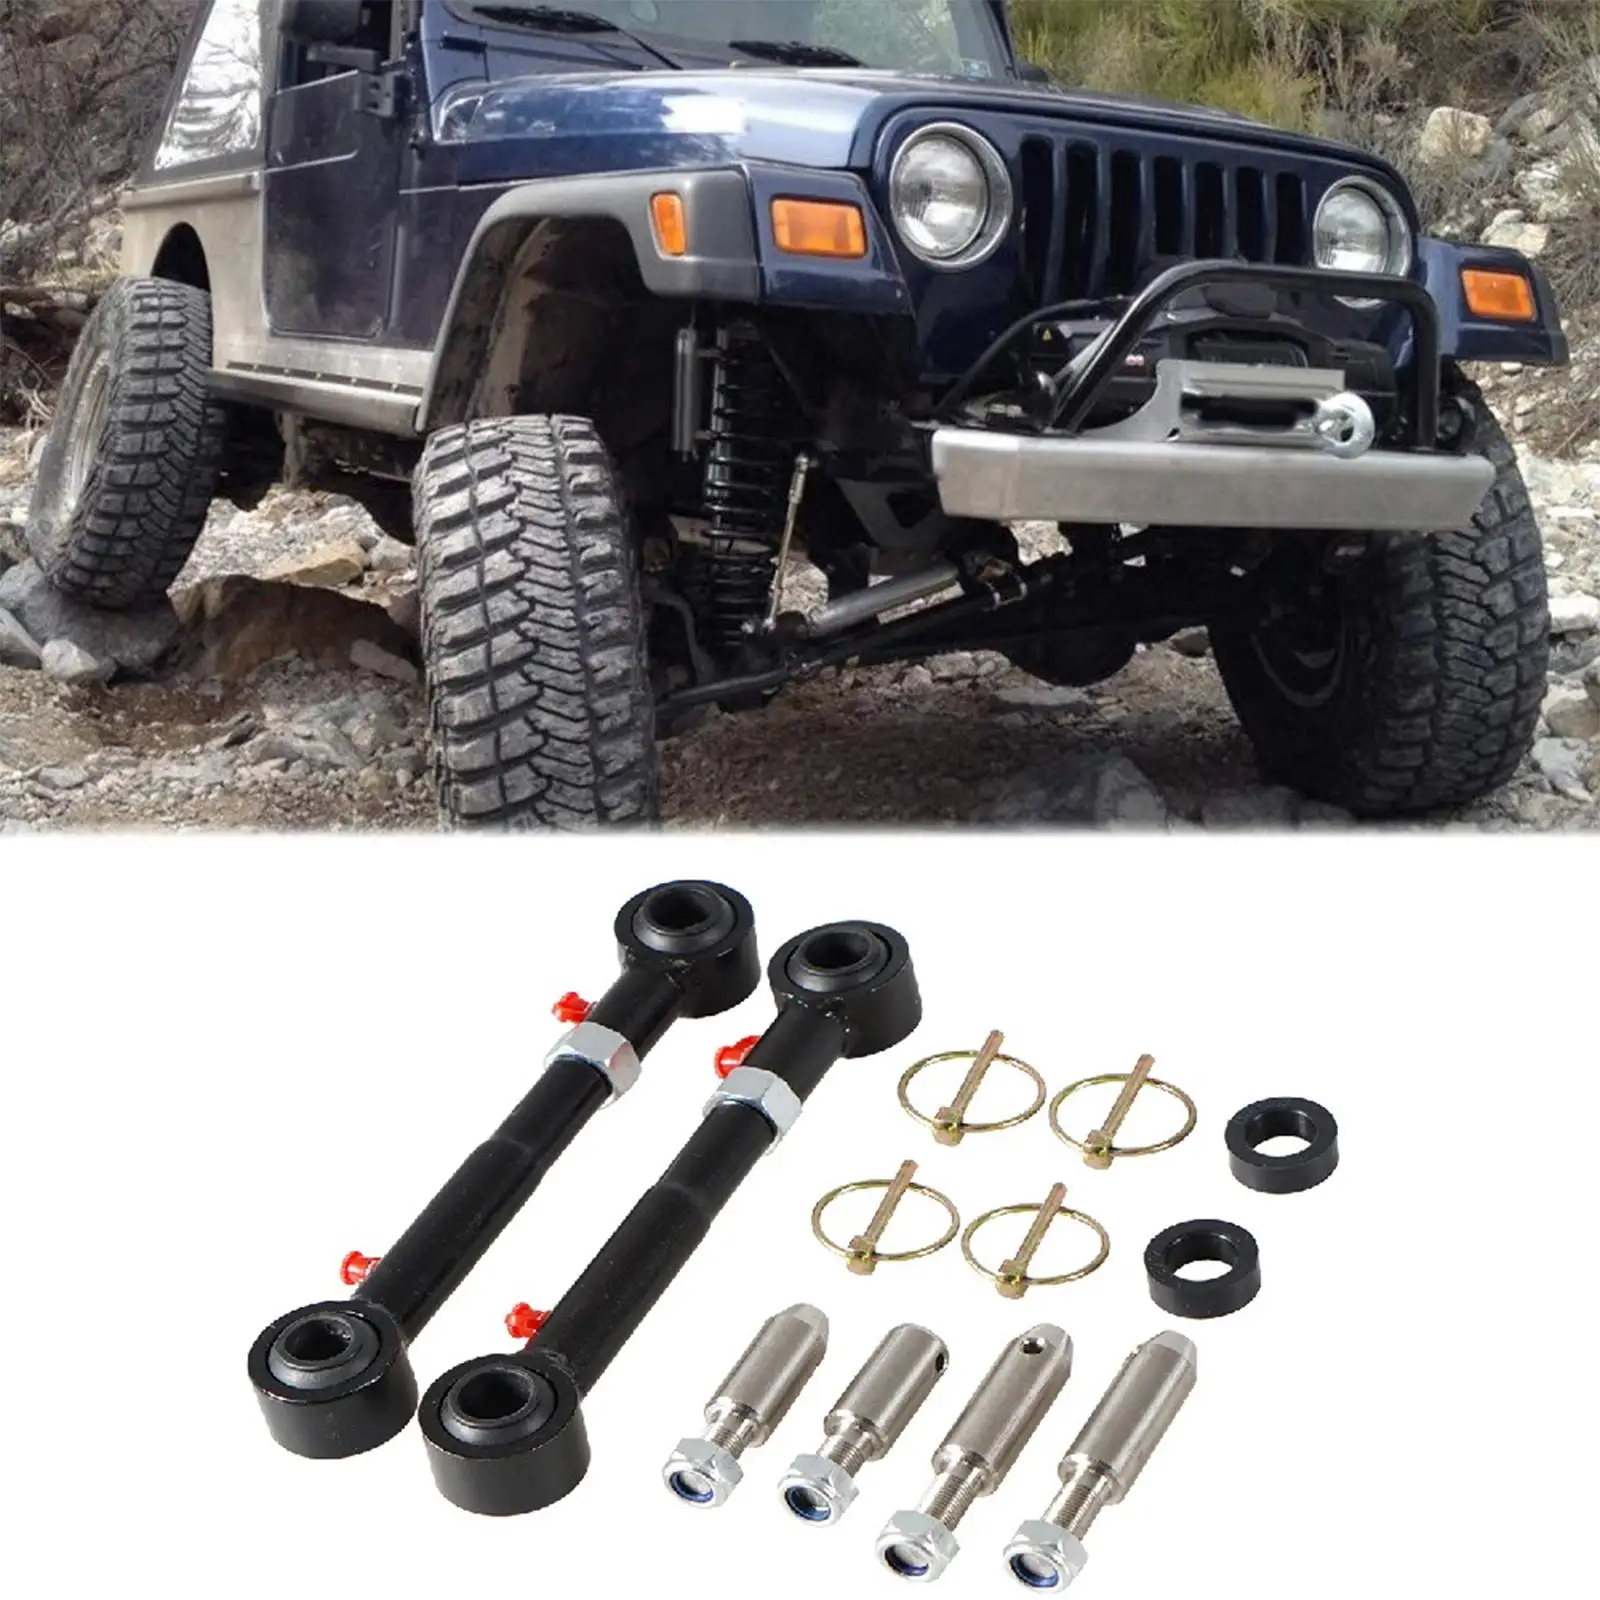 Adjustable  Links Disconnects Stainless  for  Jku 7  Replaces